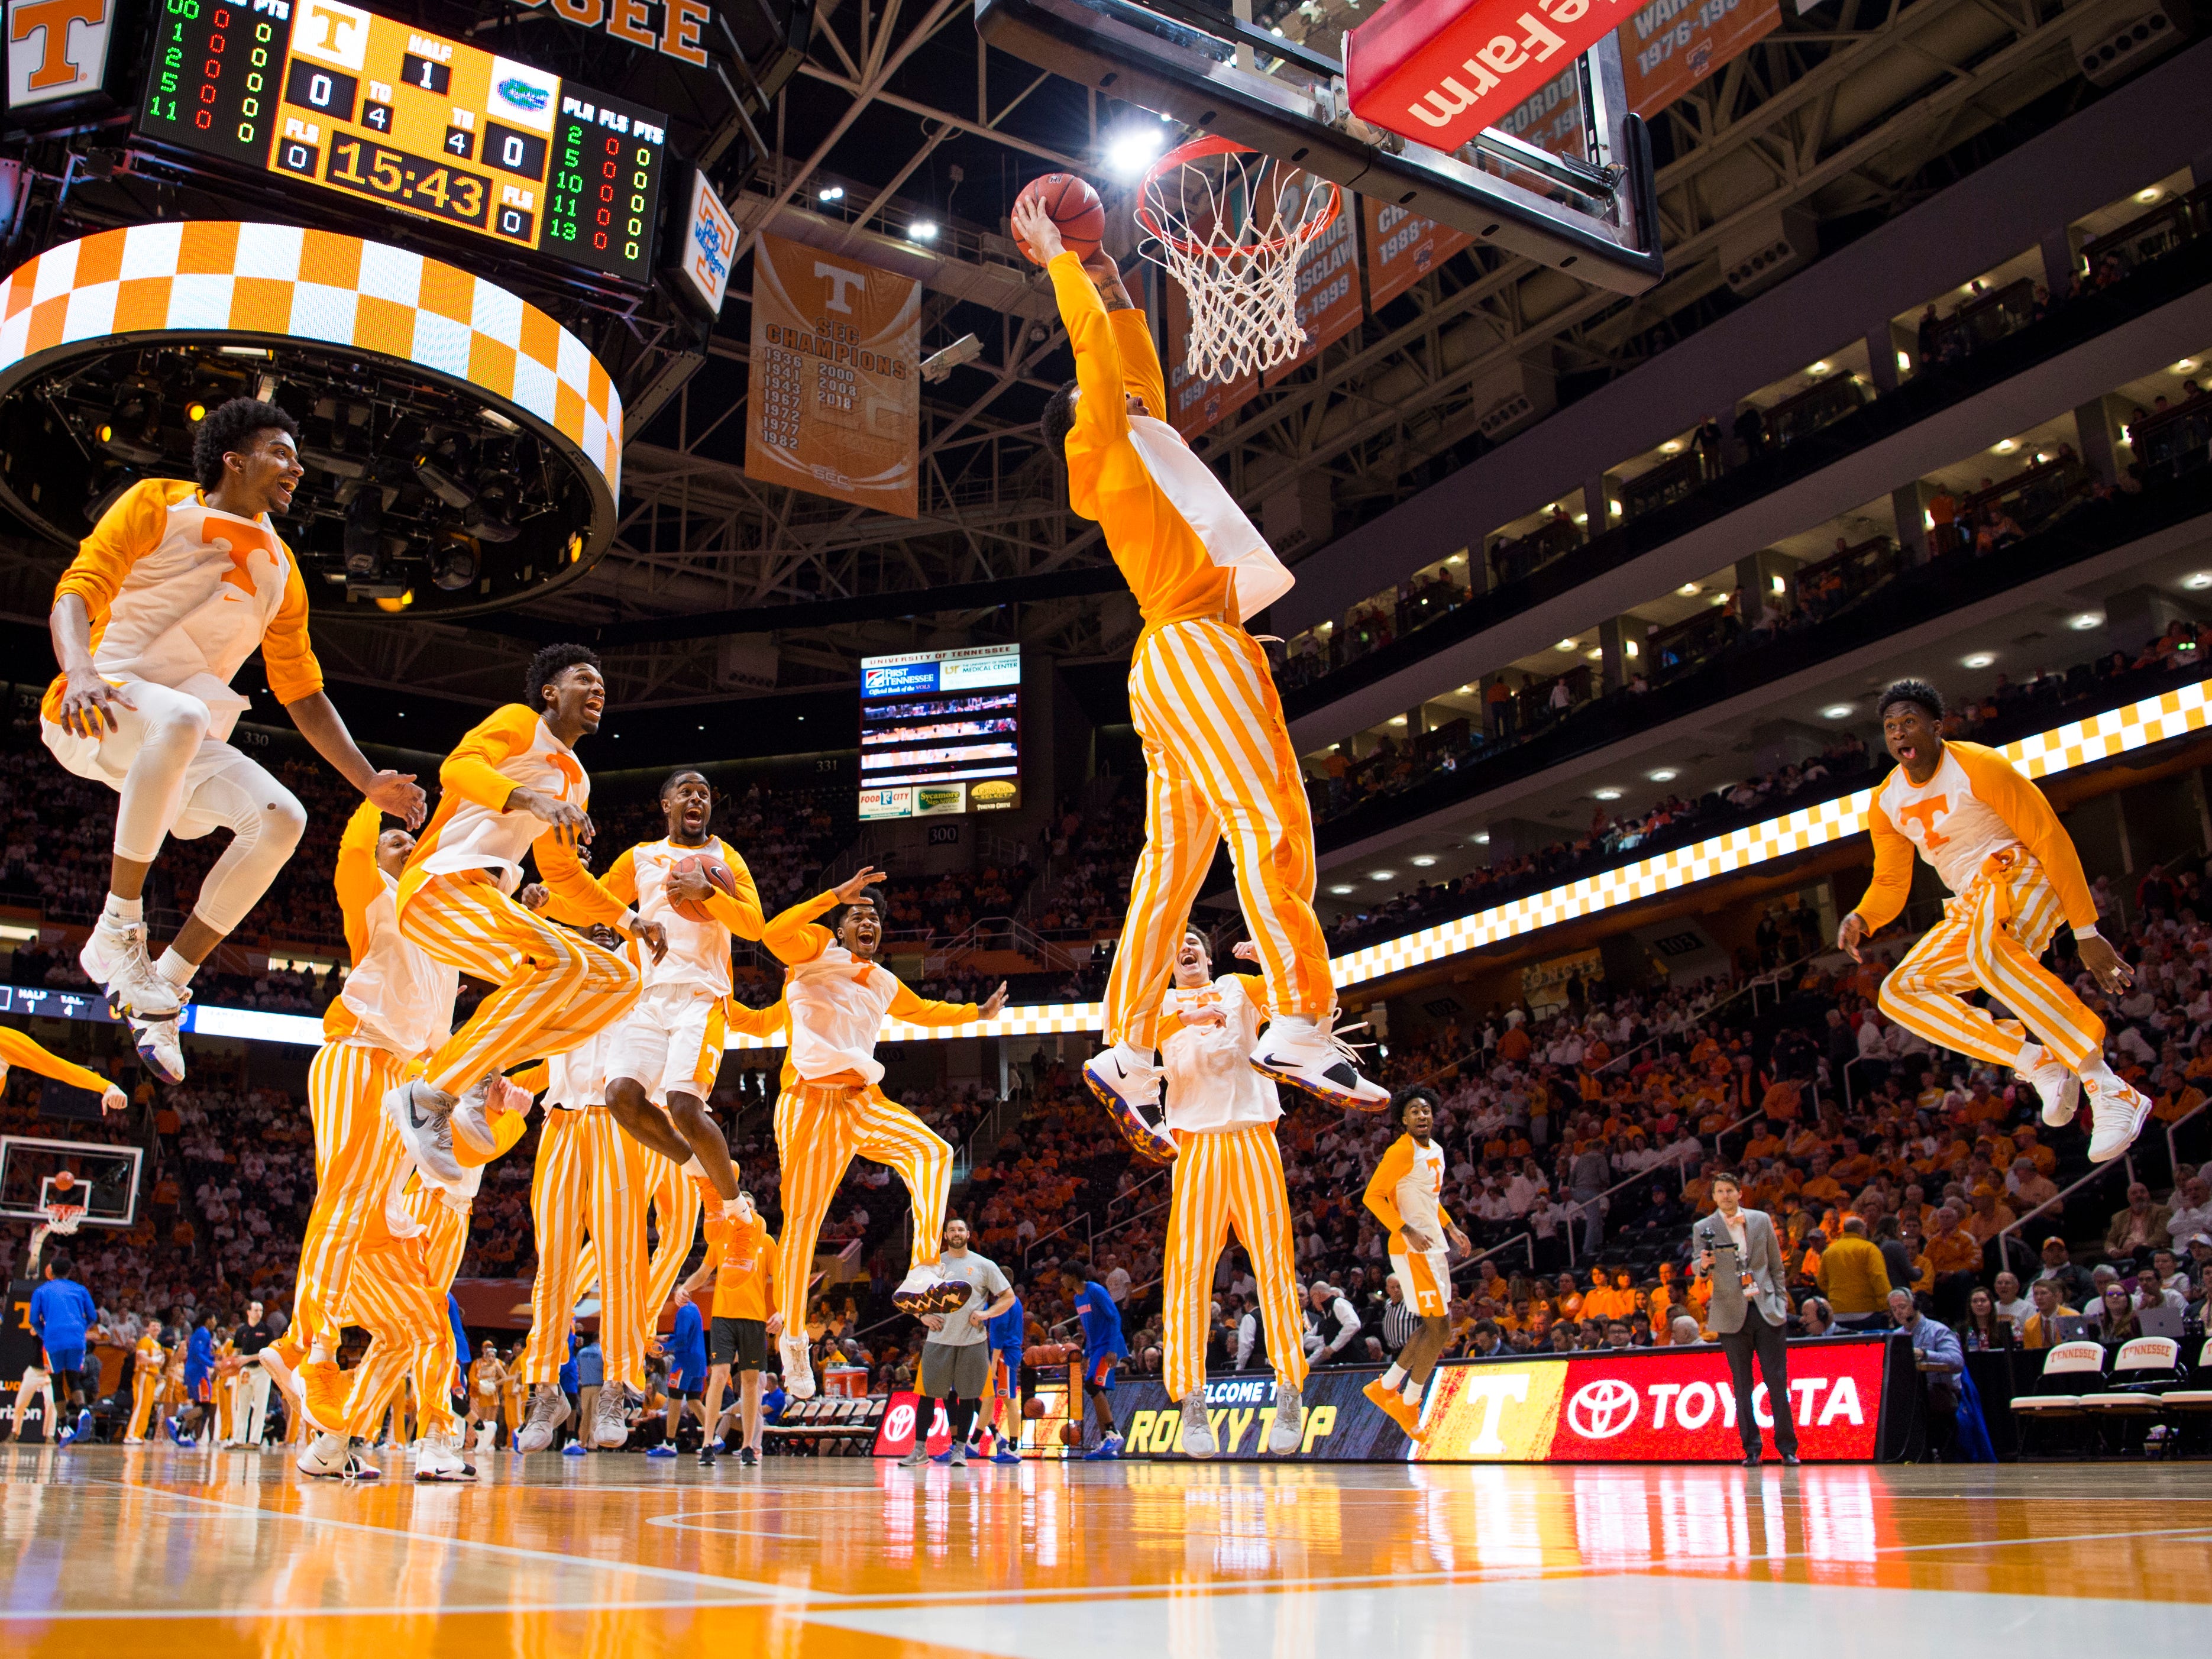 How Tennessee basketball pregame dunk Tennessee's pregame dunk routine...